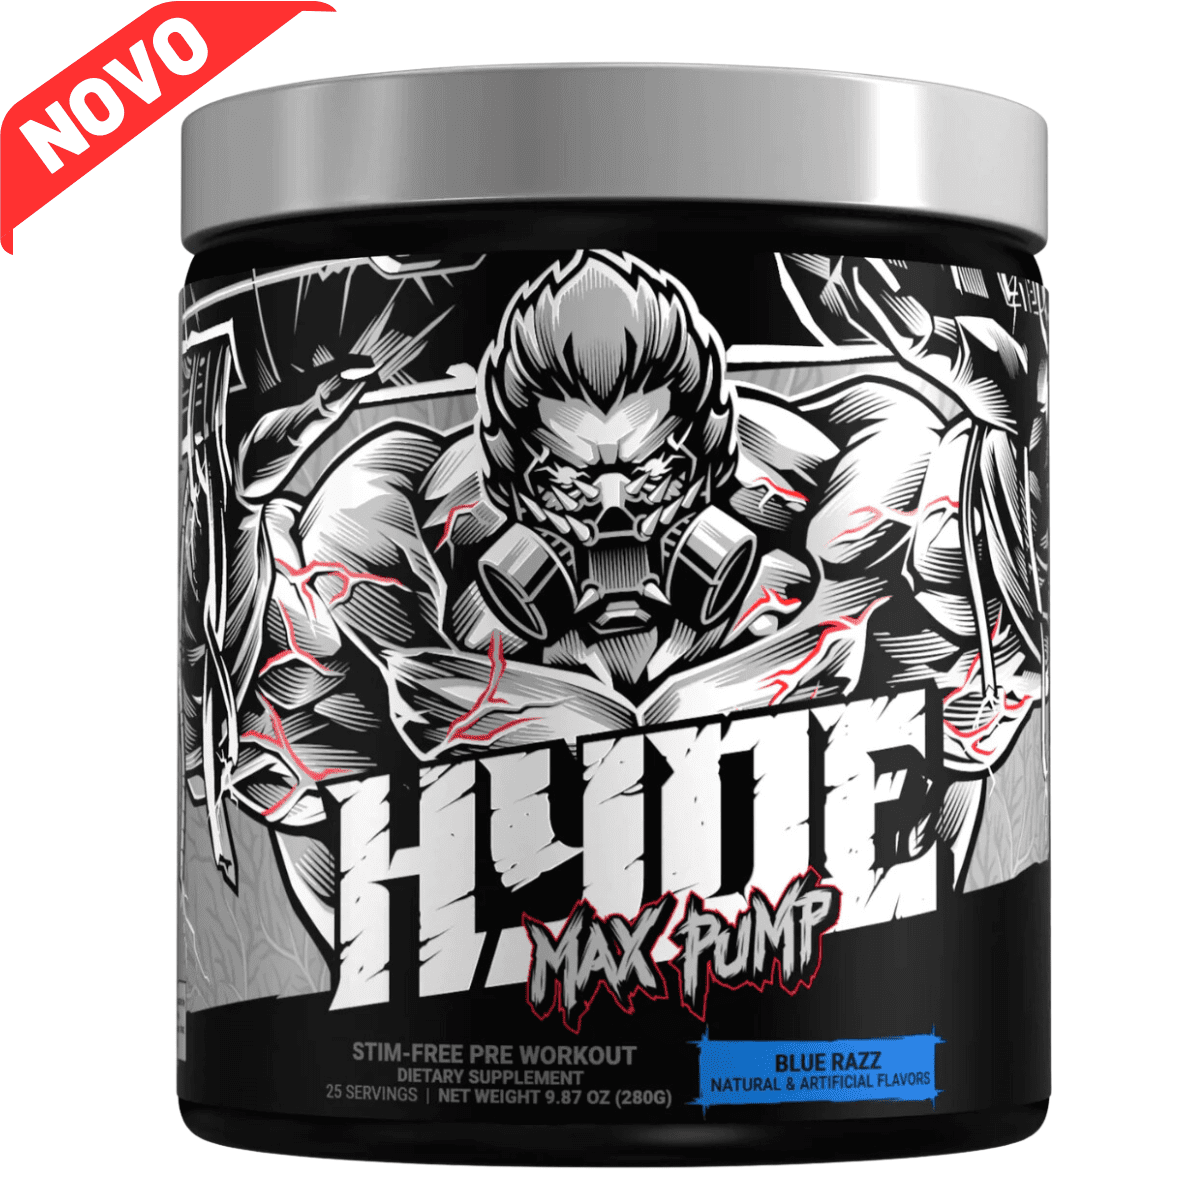 ProSupps HYDE Max Pump - 9